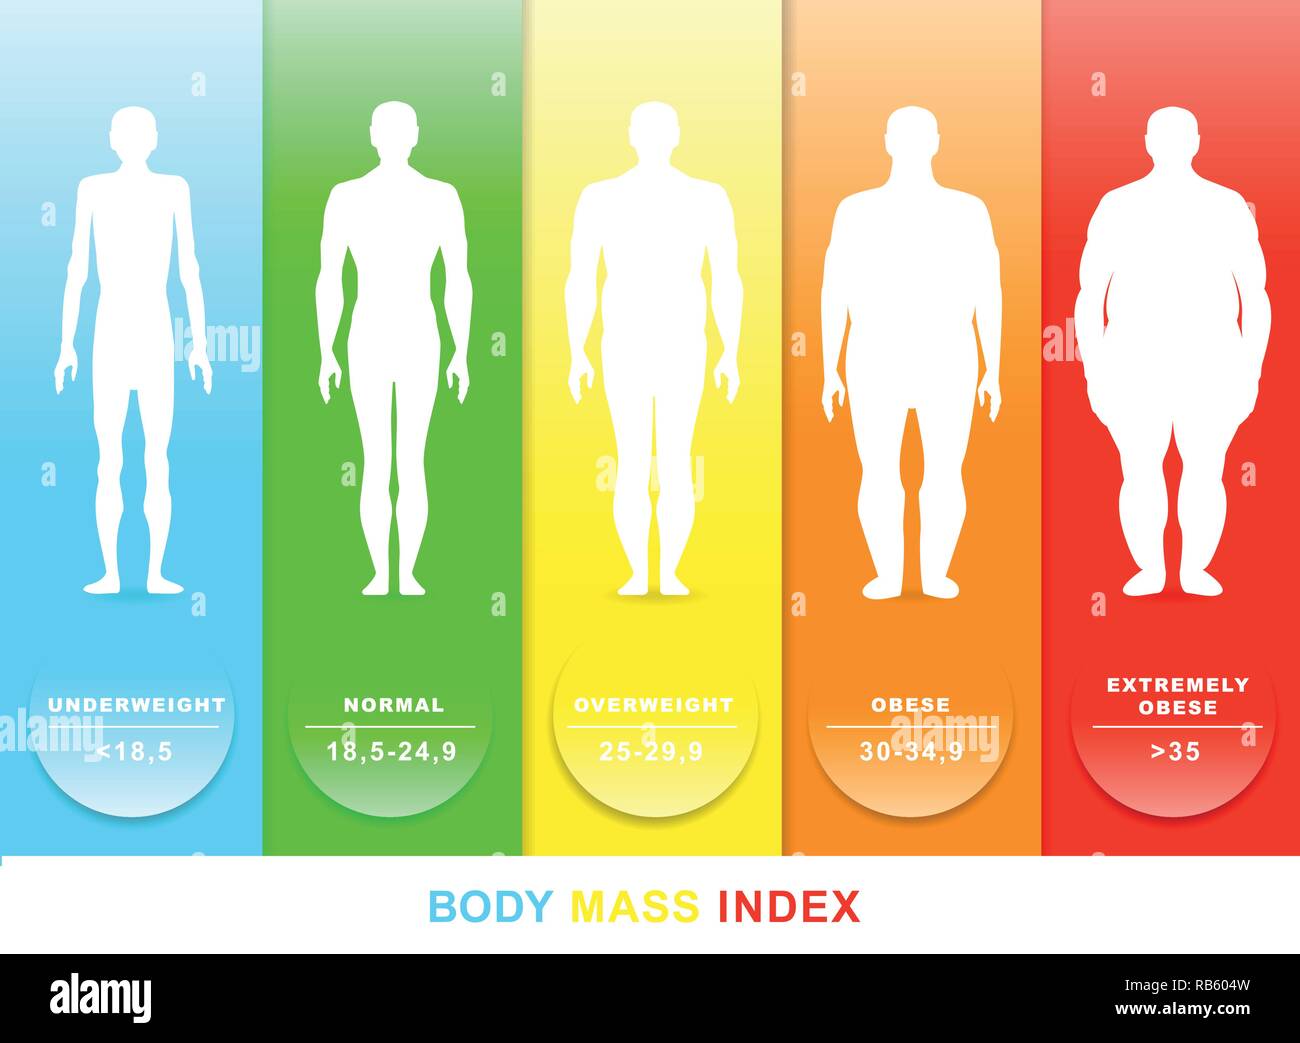 https://c8.alamy.com/comp/RB604W/body-mass-index-vector-illustration-silhouettes-with-different-obesity-degrees-eps-10-RB604W.jpg